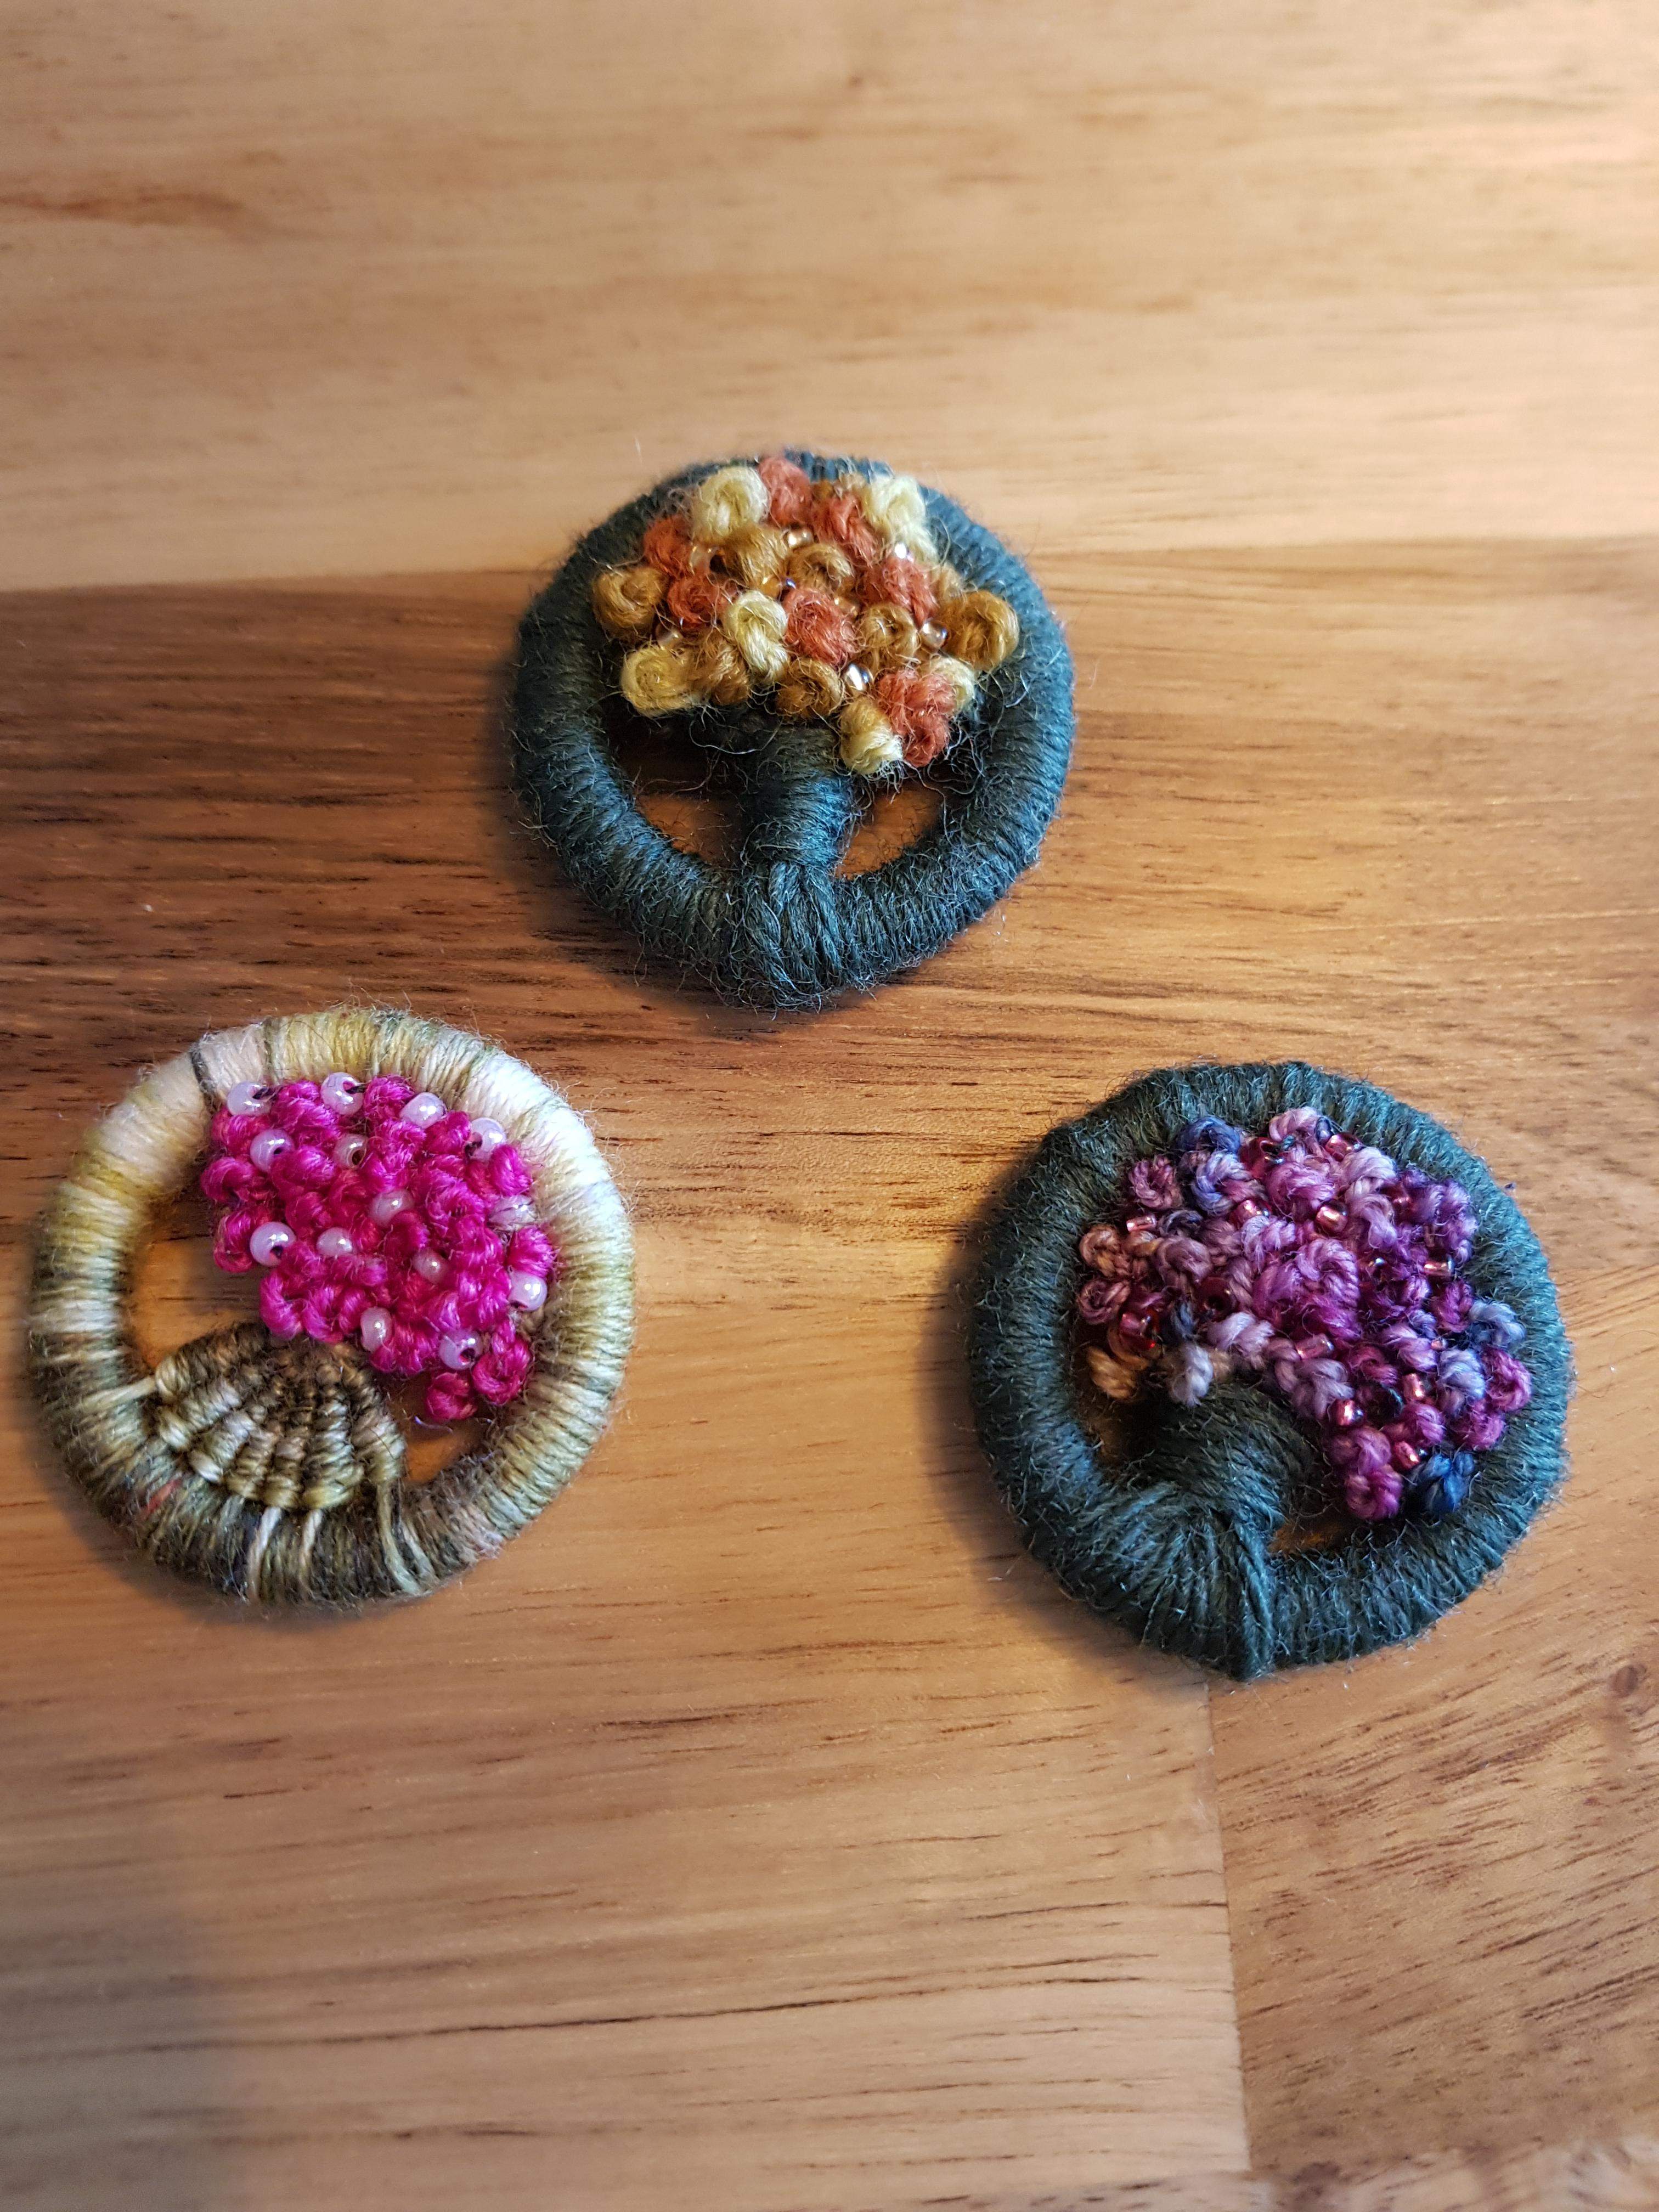 June knitting and crochet retreat - Puce des couturieres and Dorset Buttons